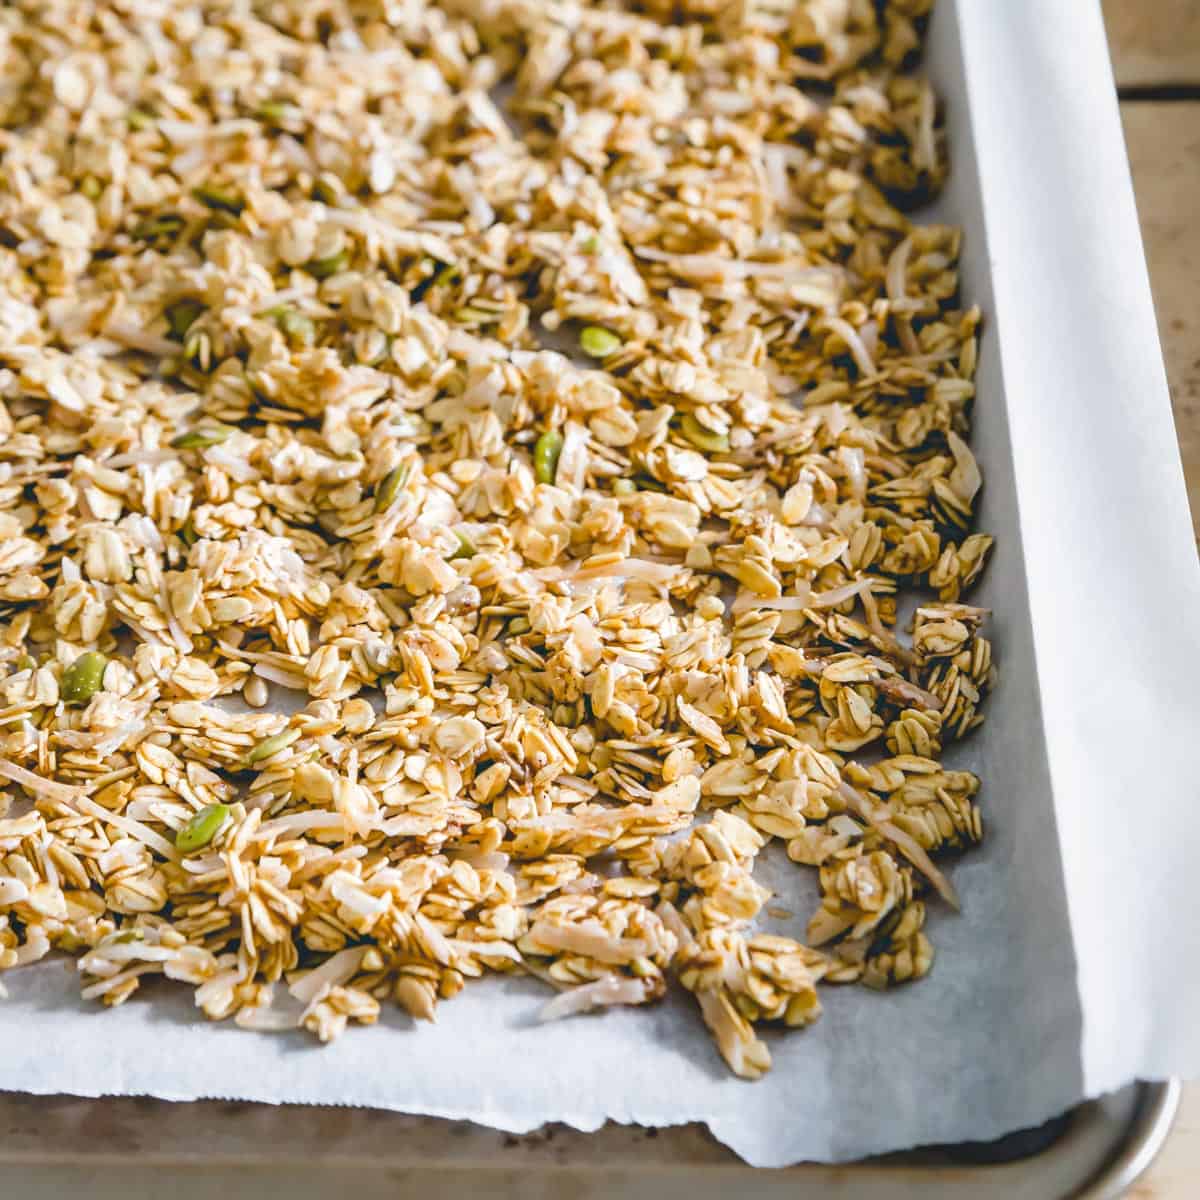 Nut free granola on a sheet pan lined with parchment paper before baking and adding dried fruit.